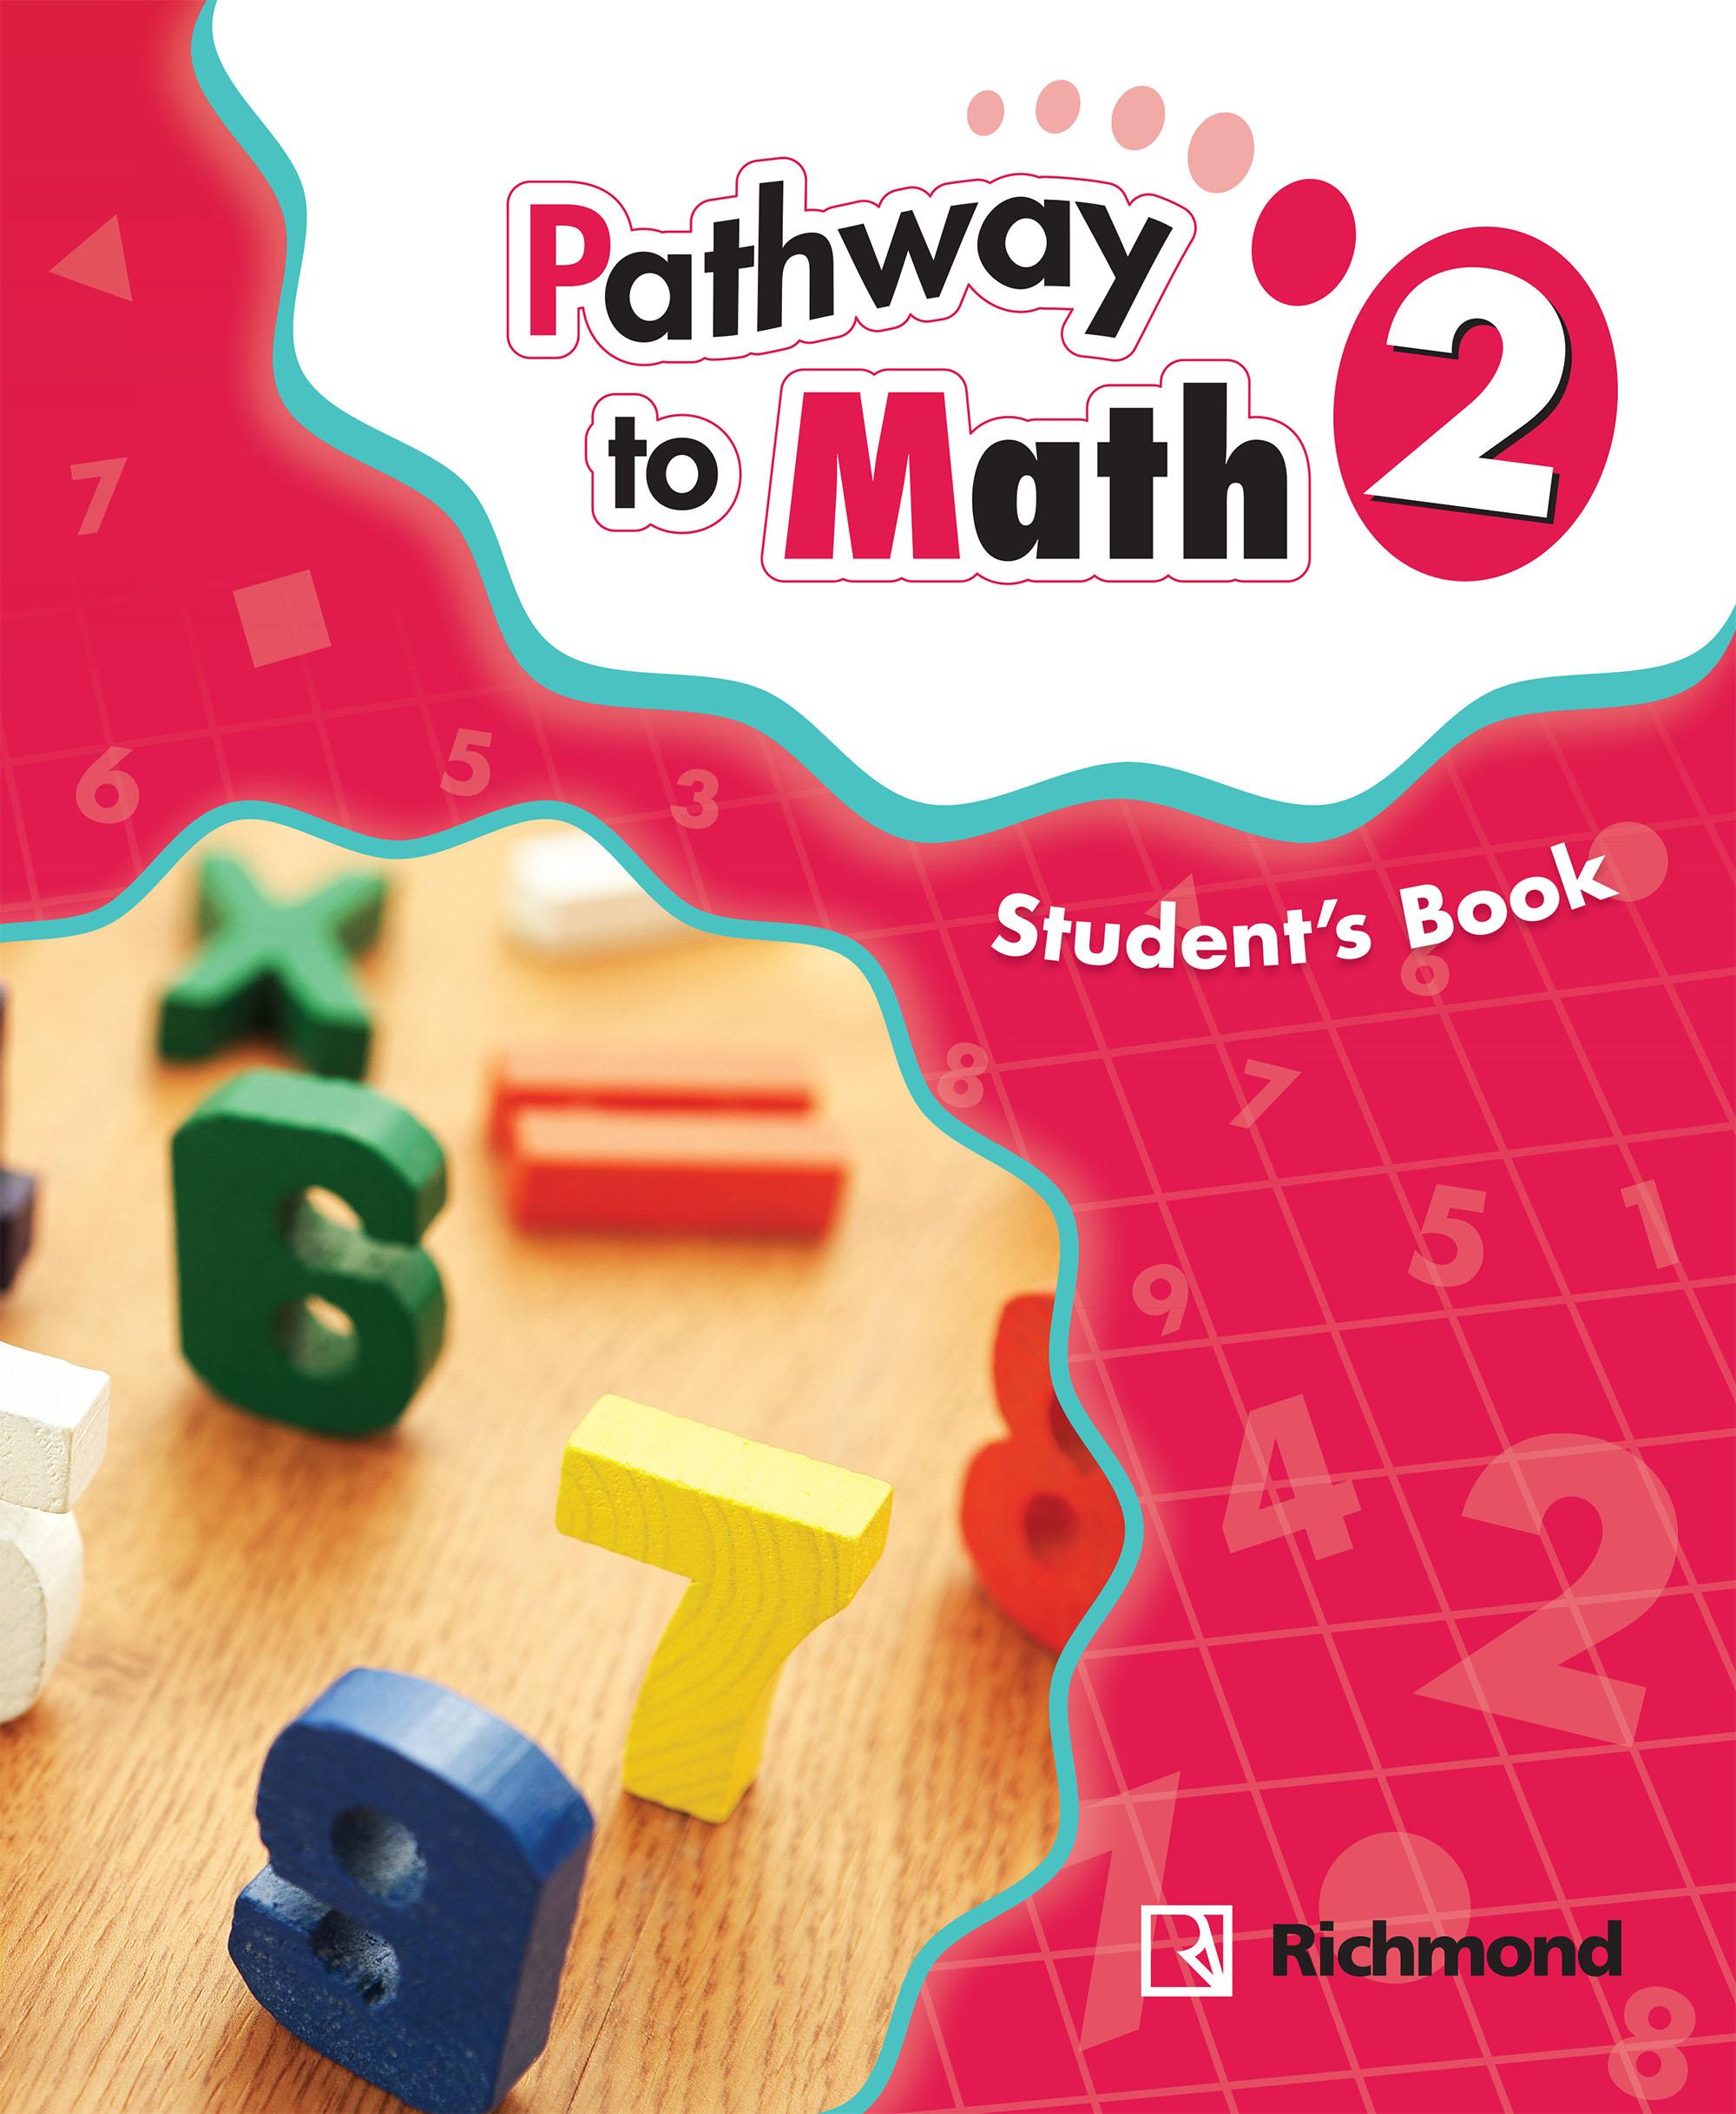 Pathway To Math 2 Student's Book